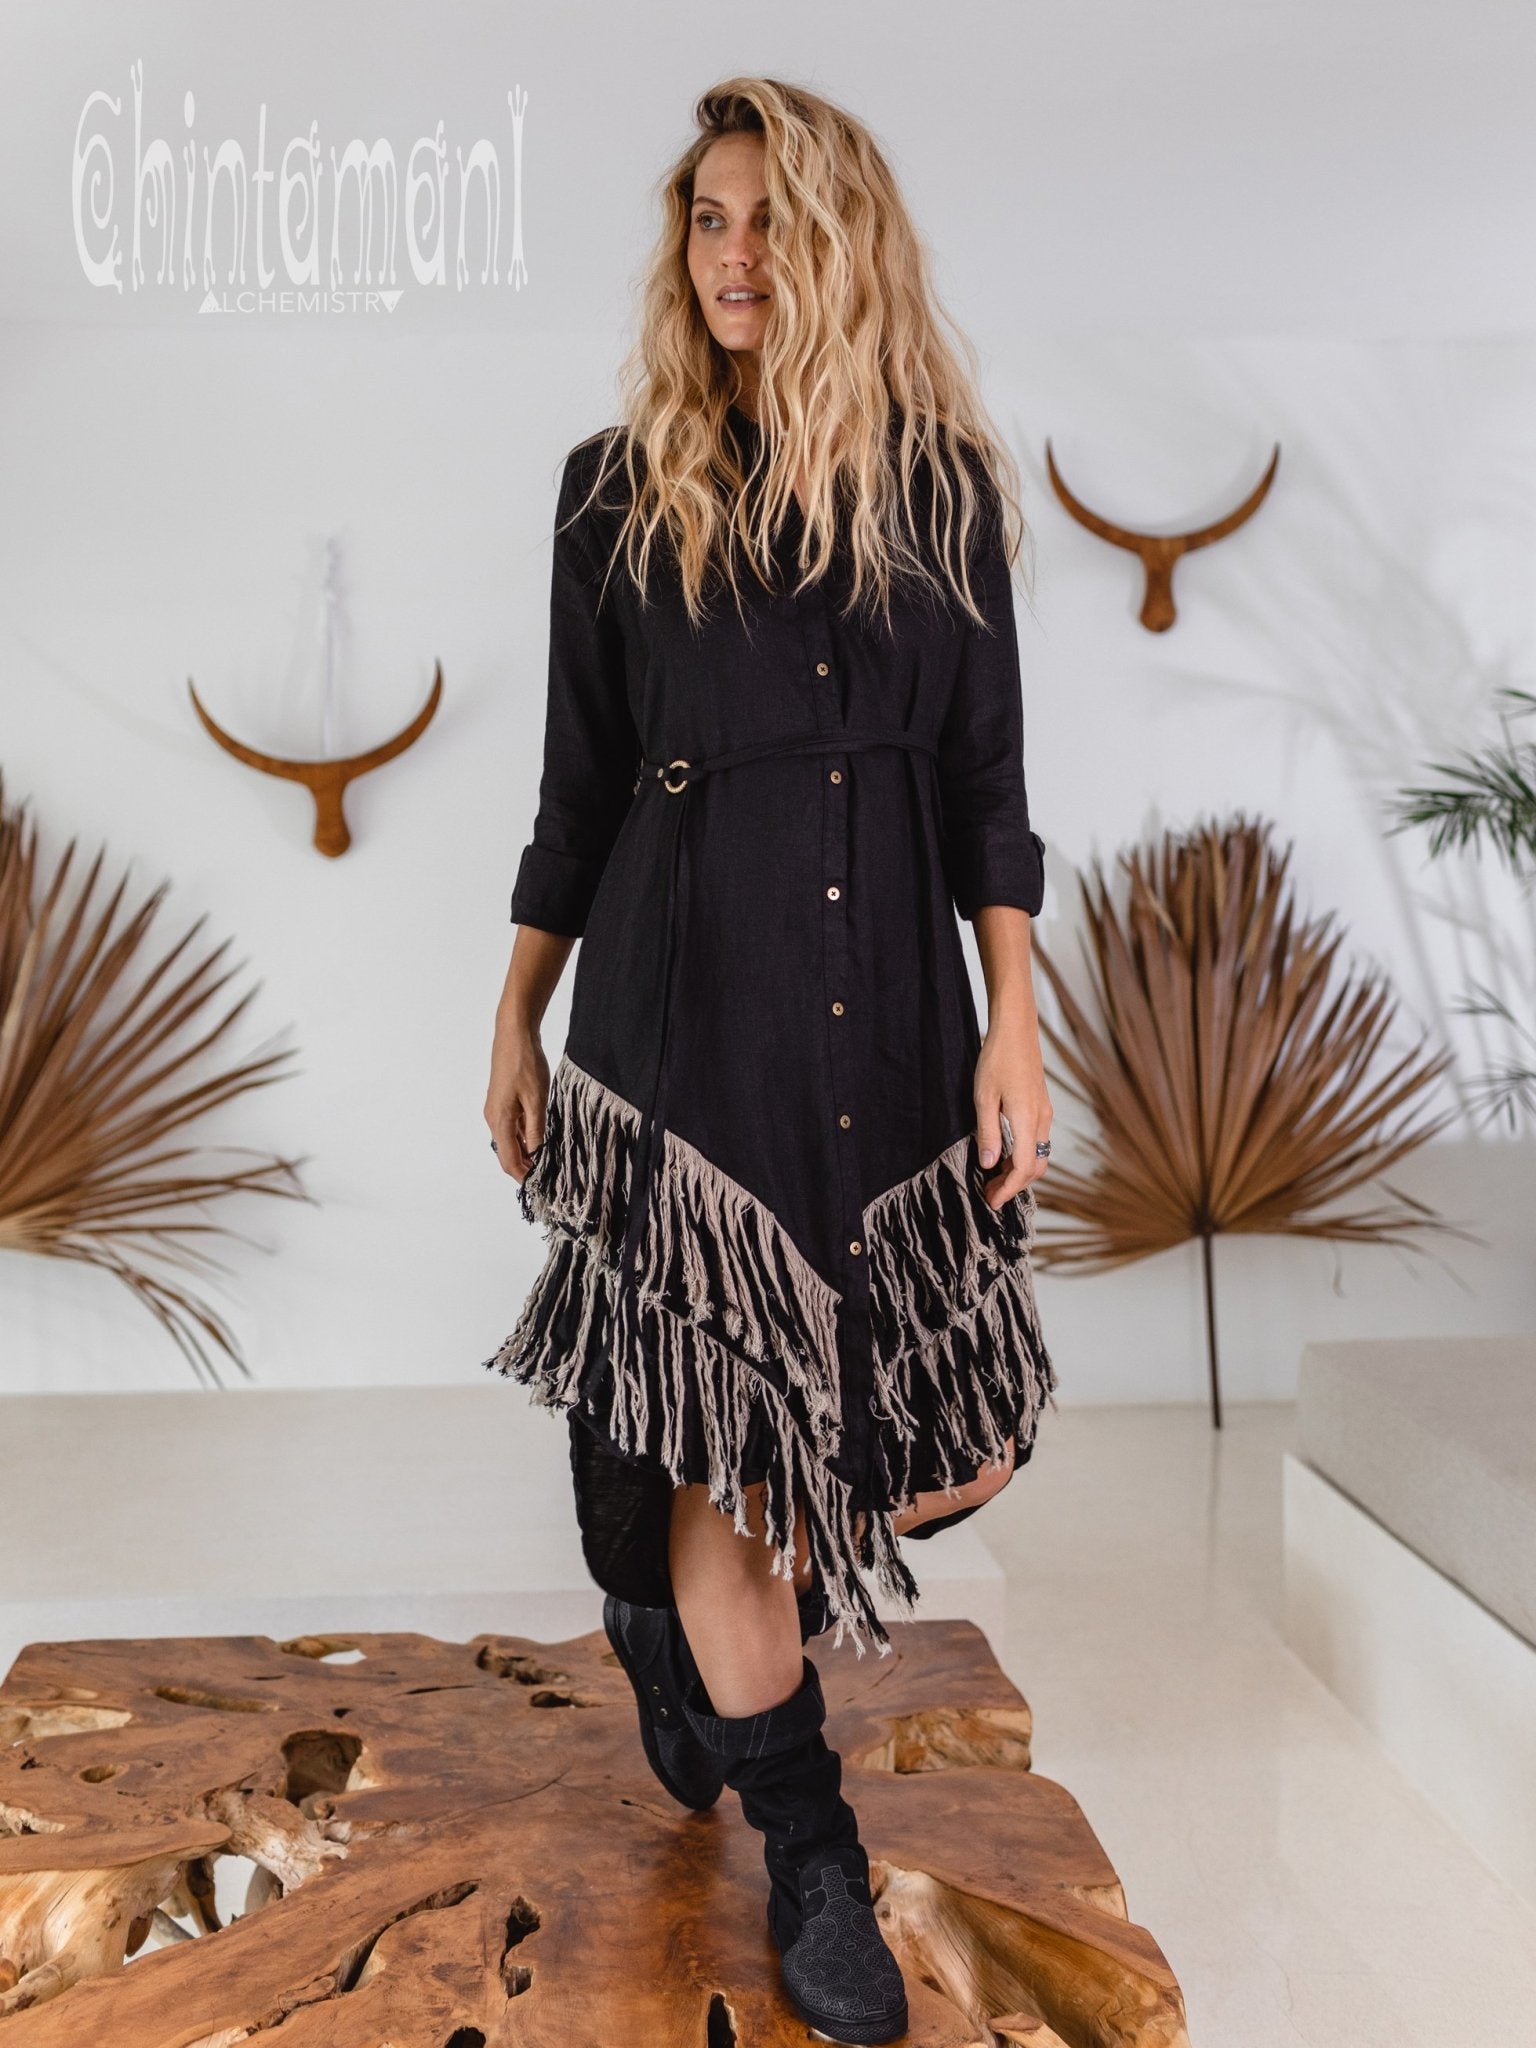 5 Fun Fringe Dress Trends To Try This Spring/Summer '23